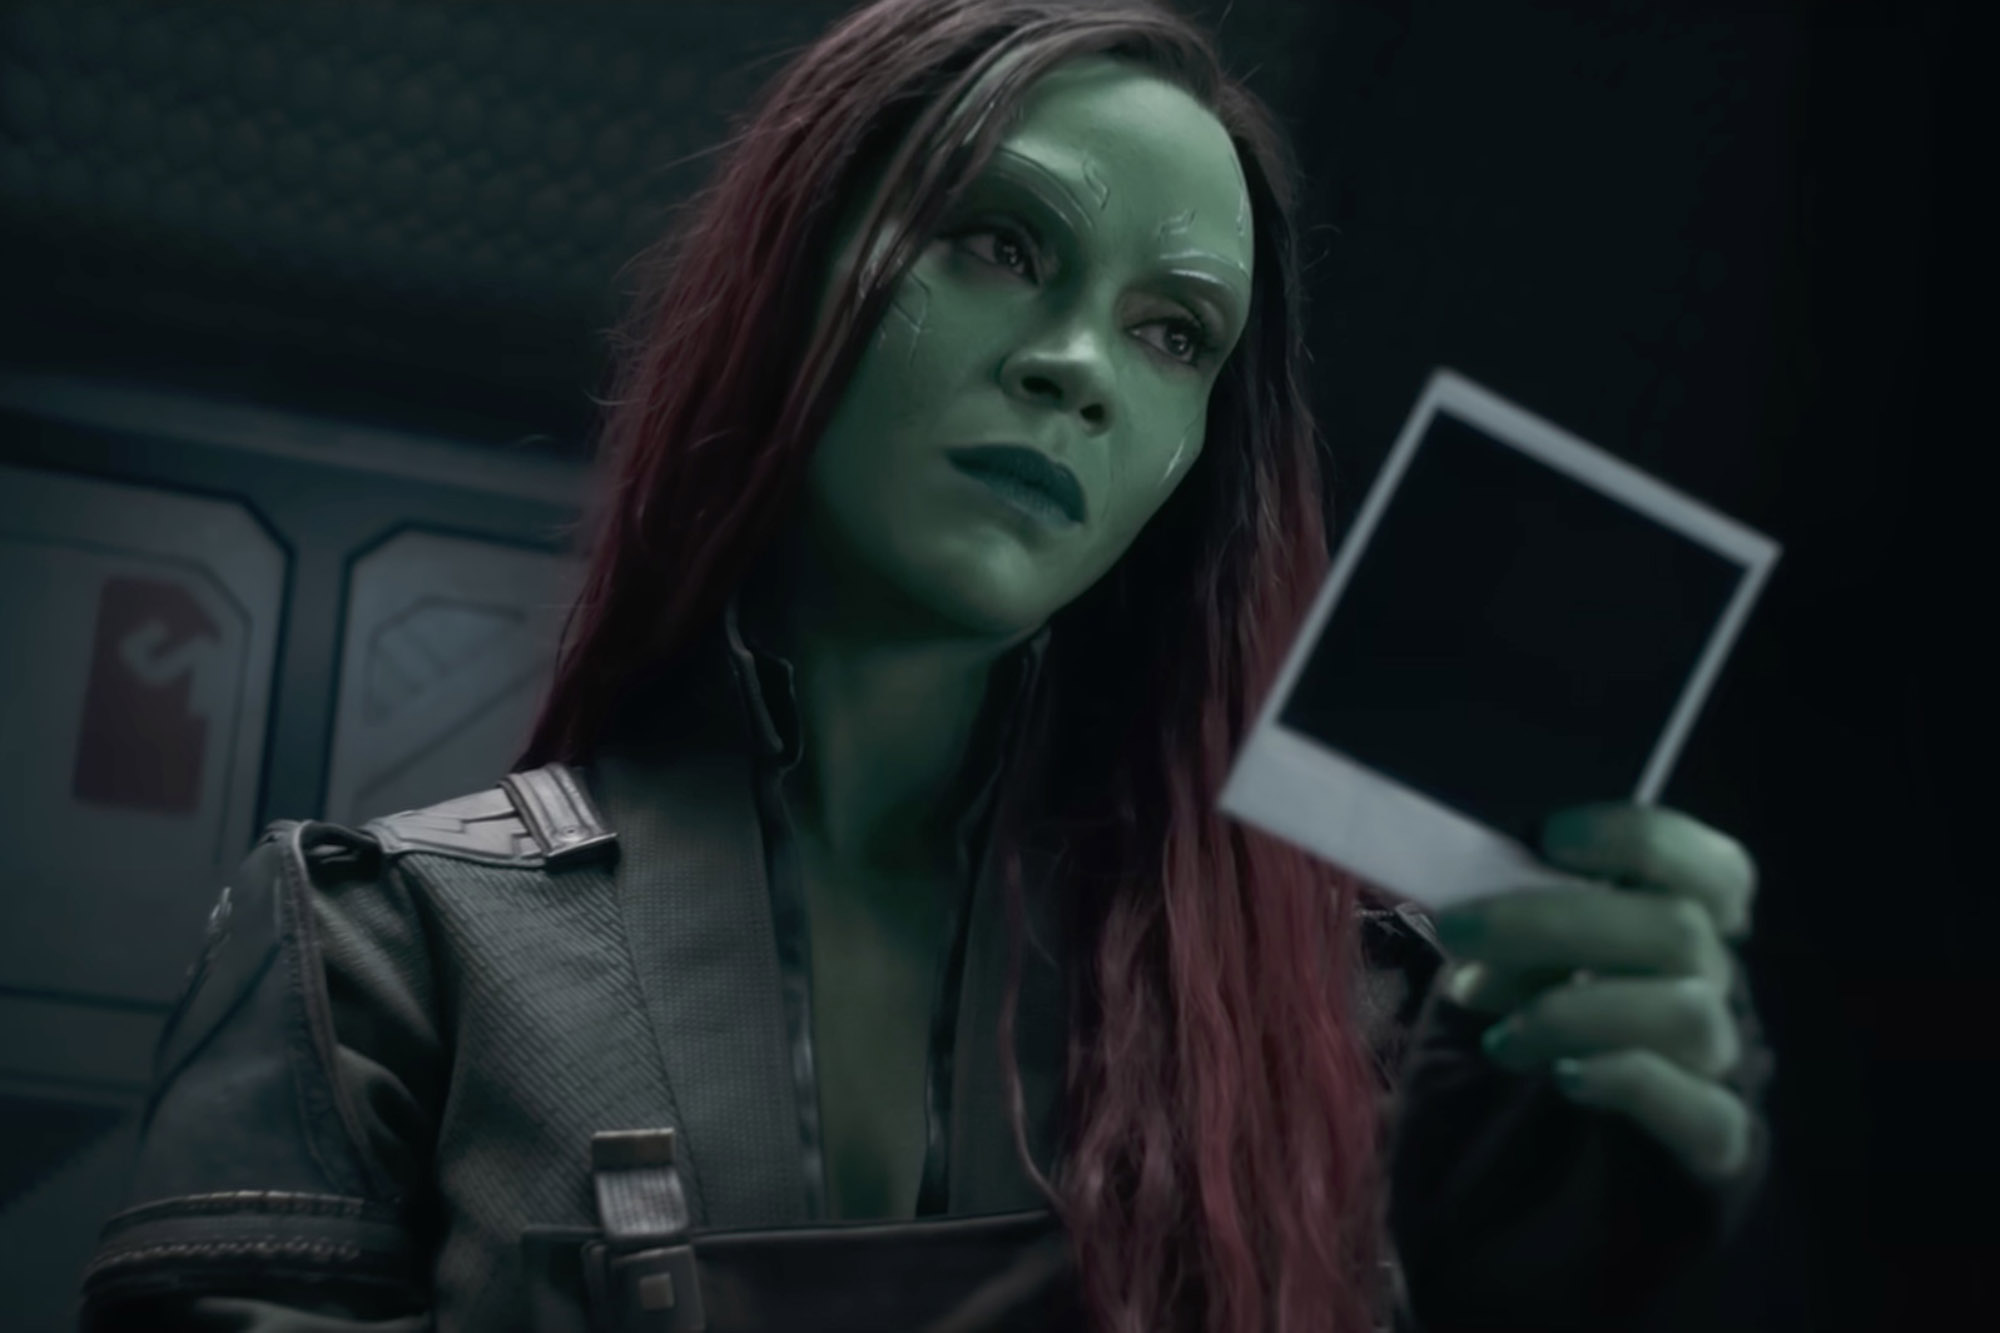 anis mansour add pictures of gamora from guardians of the galaxy photo